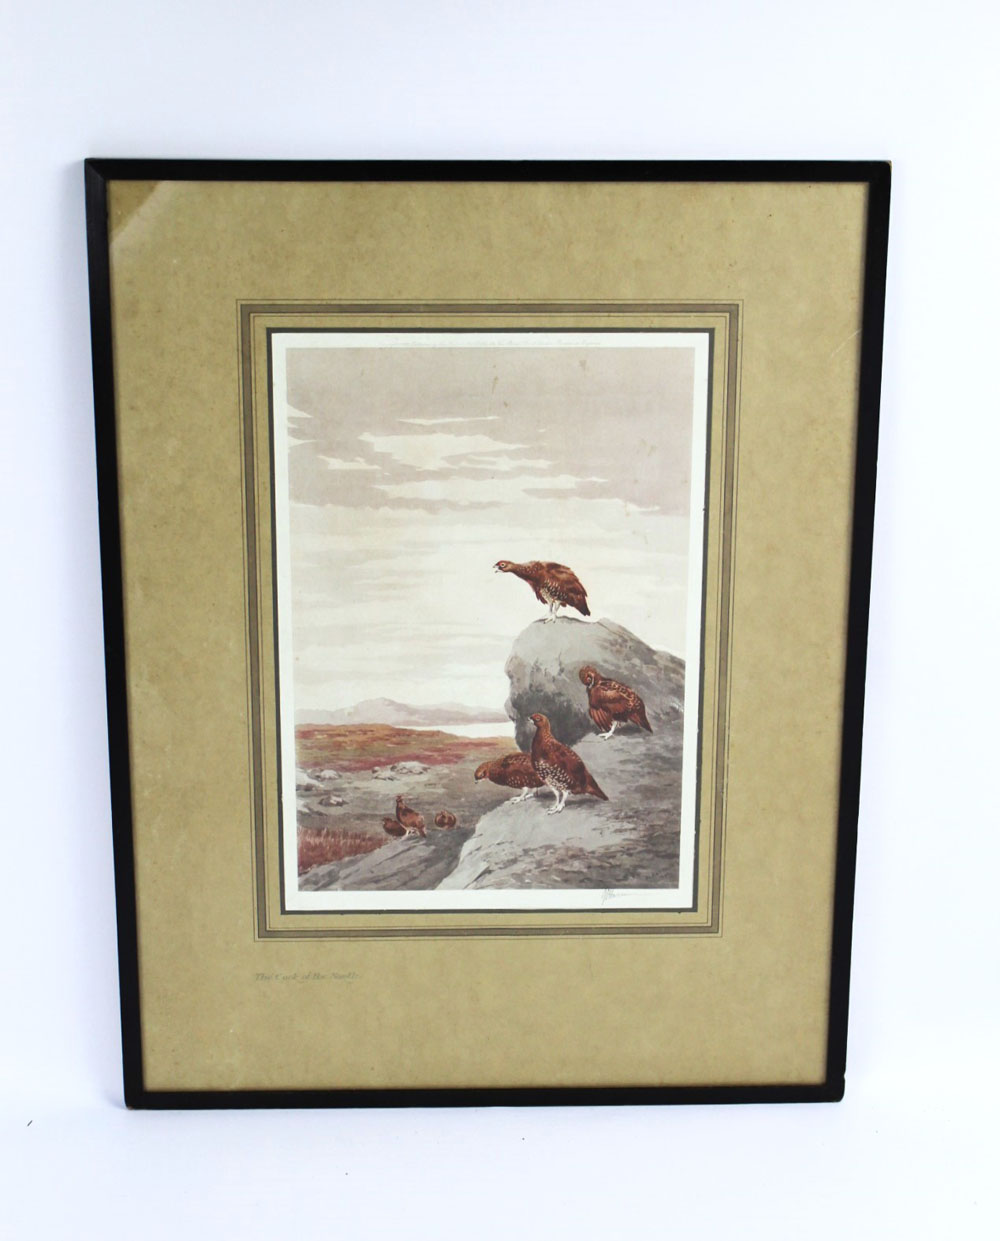 John Cyril Harrison (1898-1985), a signed print "The Cock Of The North" with red grouse, - Image 2 of 3